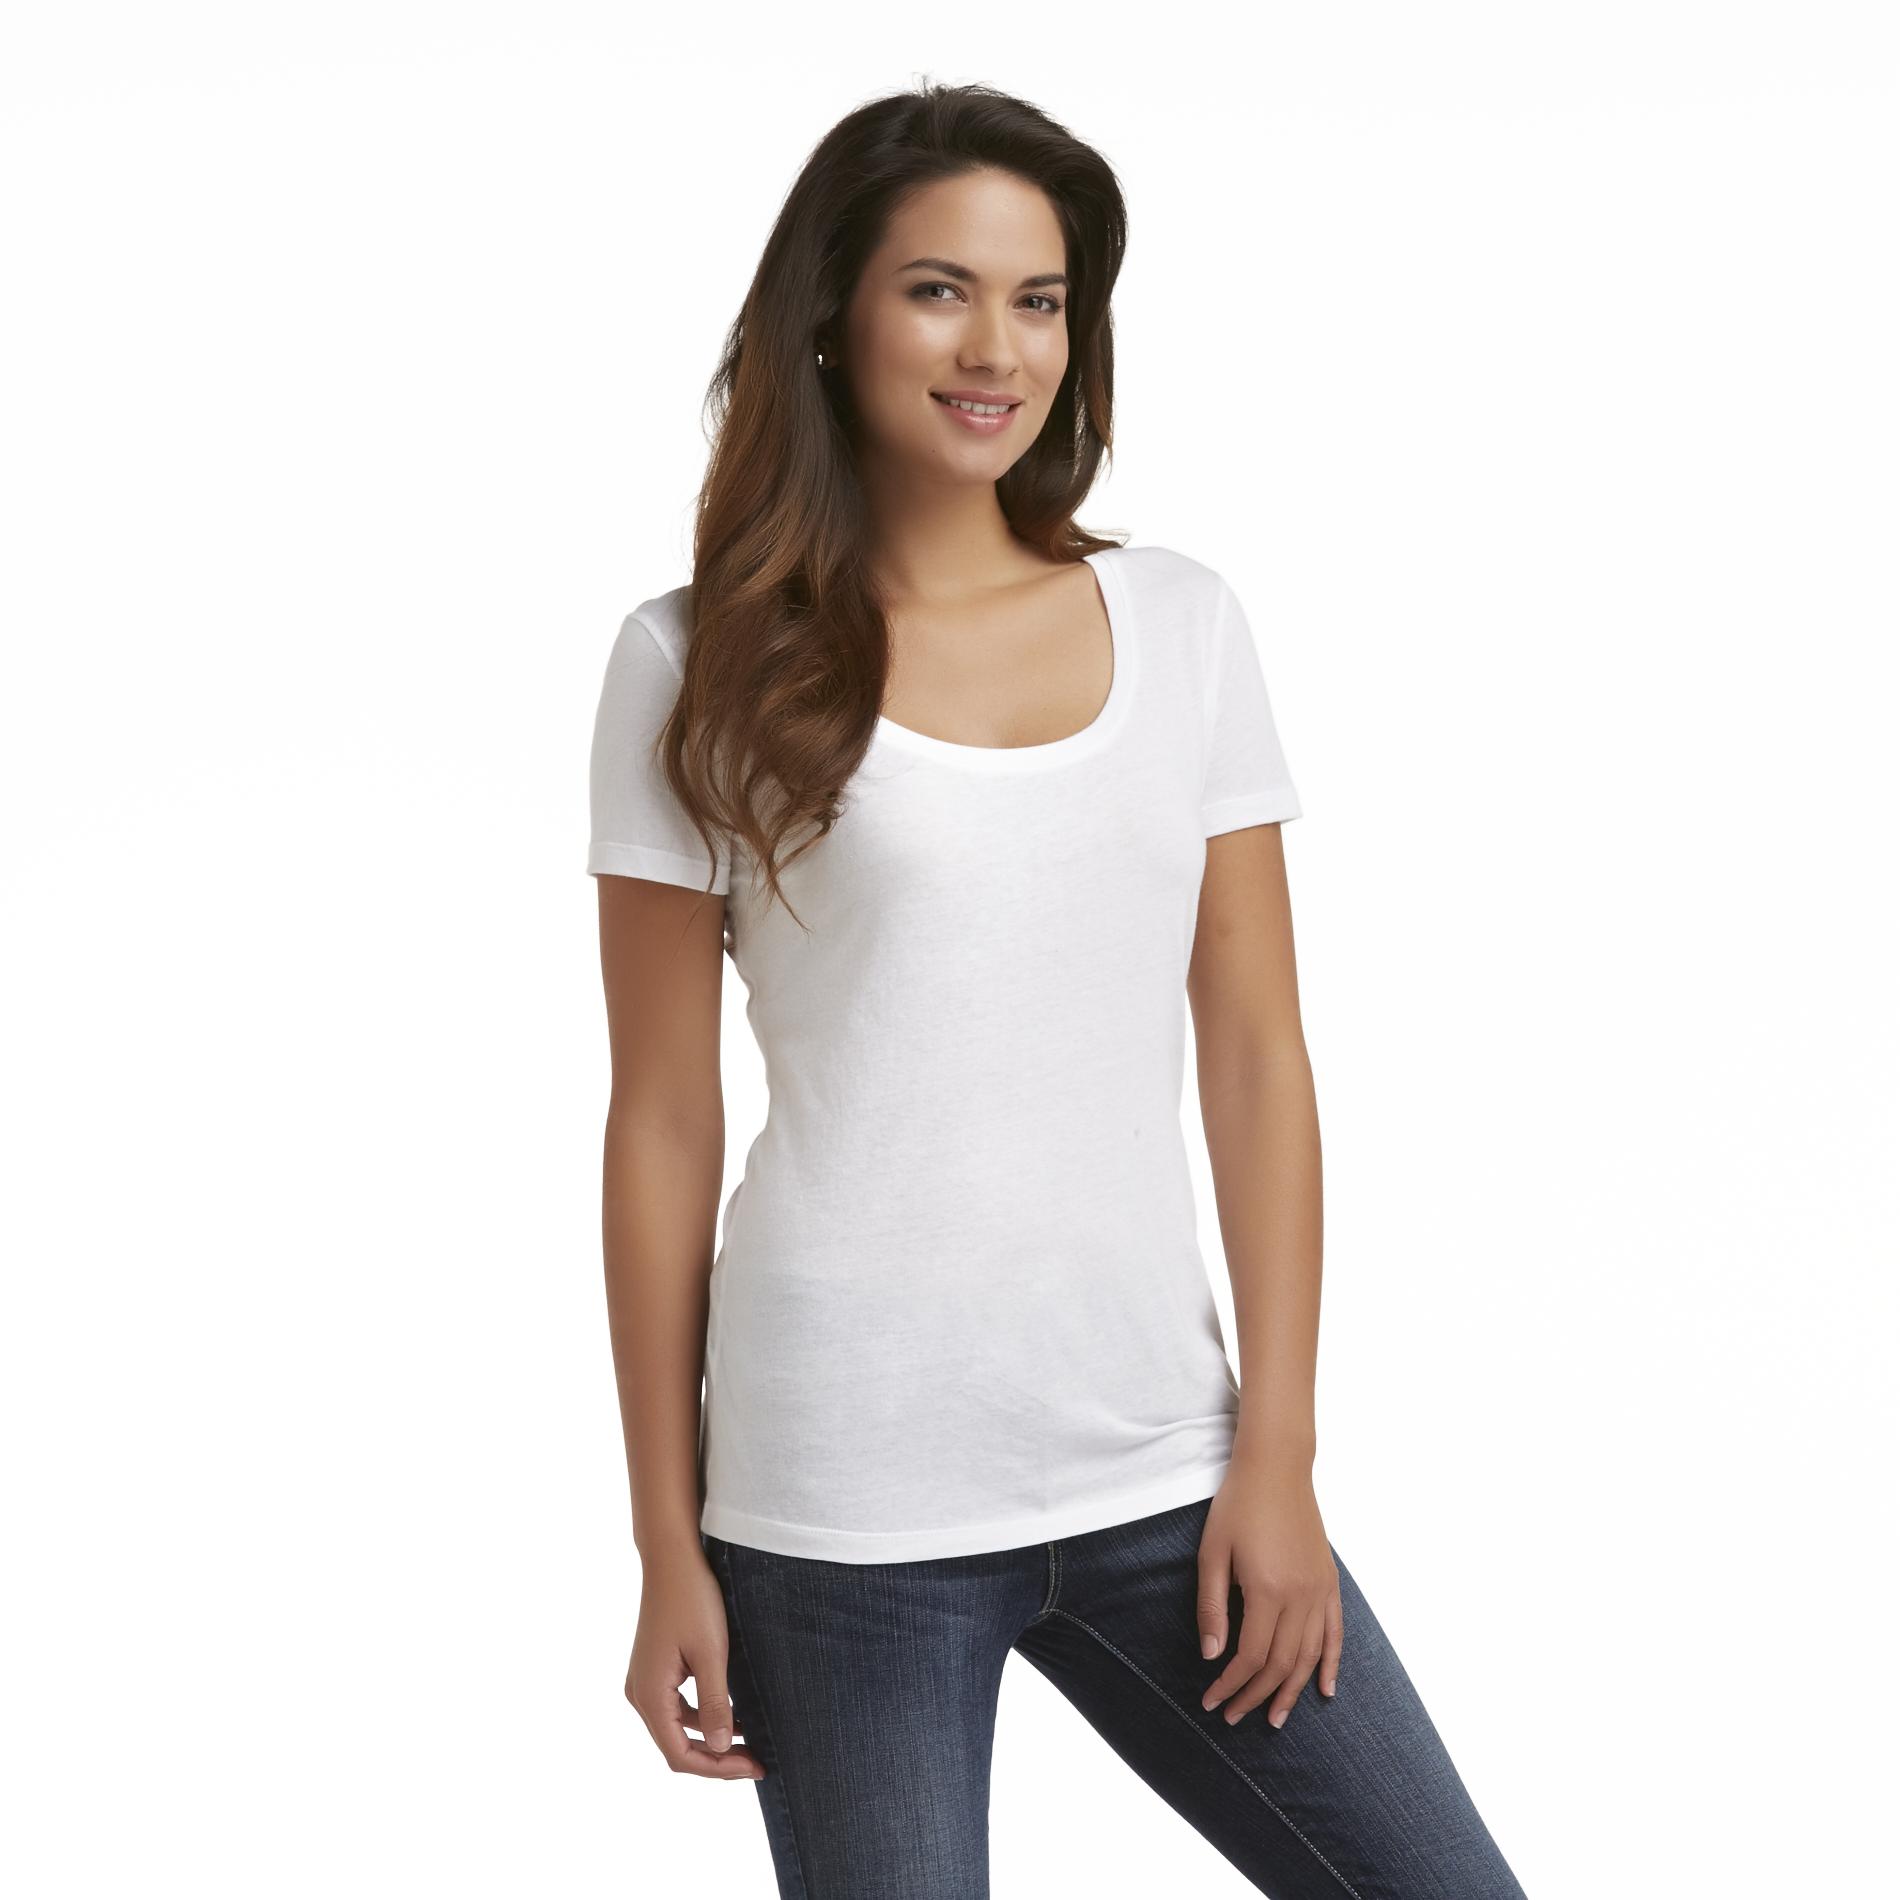 Route 66 Women's Scoop Neck T-Shirt-as seen on the Today show